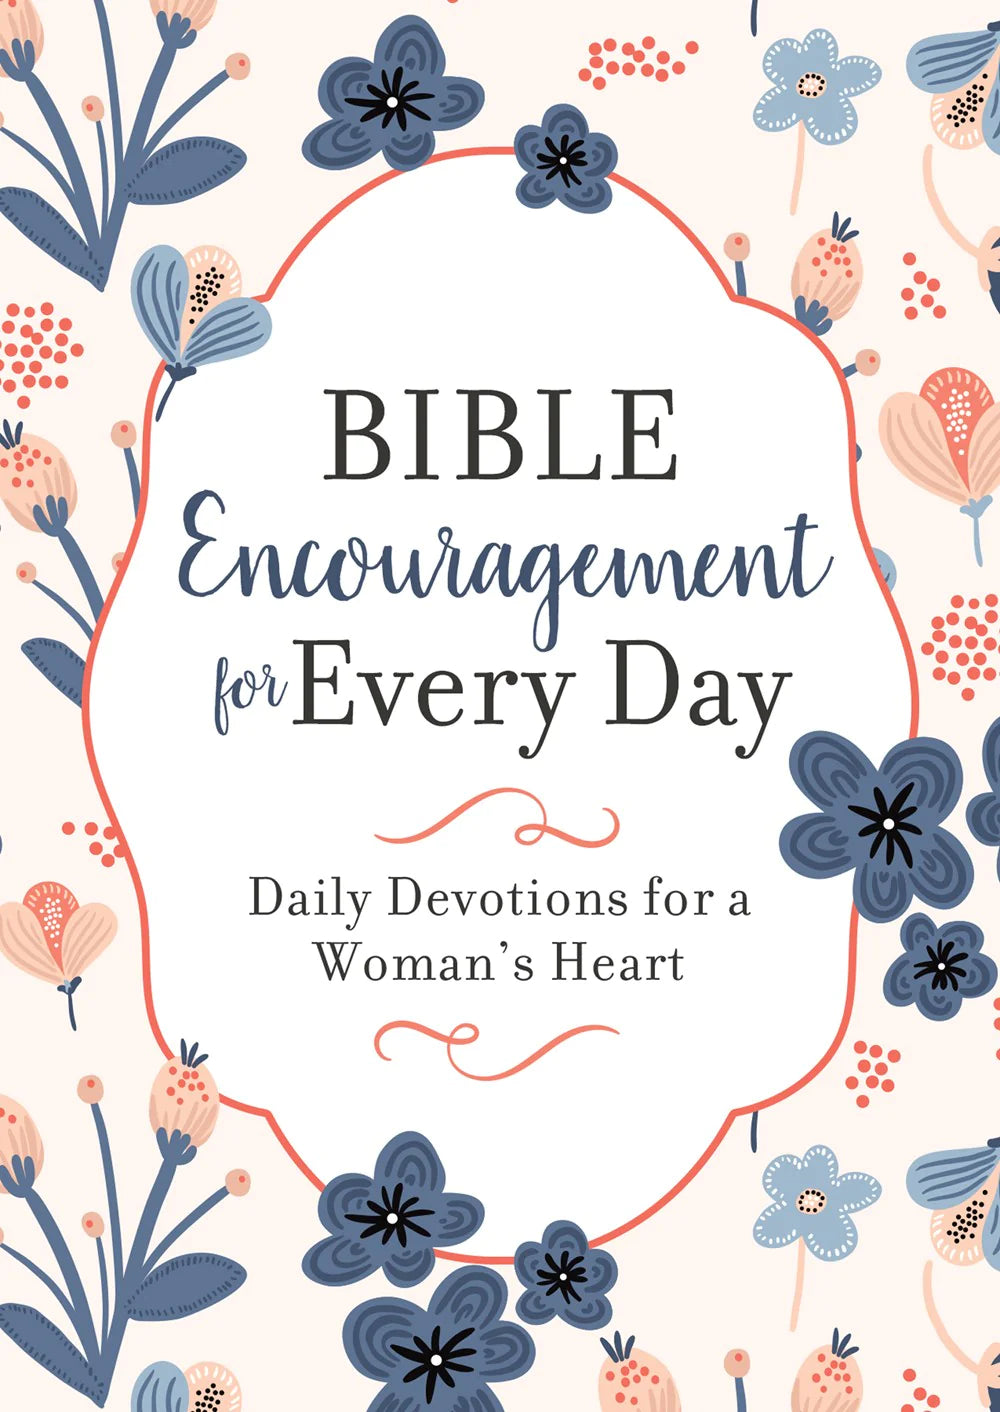 Bible Encouragement For Every Day: Daily Devotions For a Woman's Heart - Devotional Book